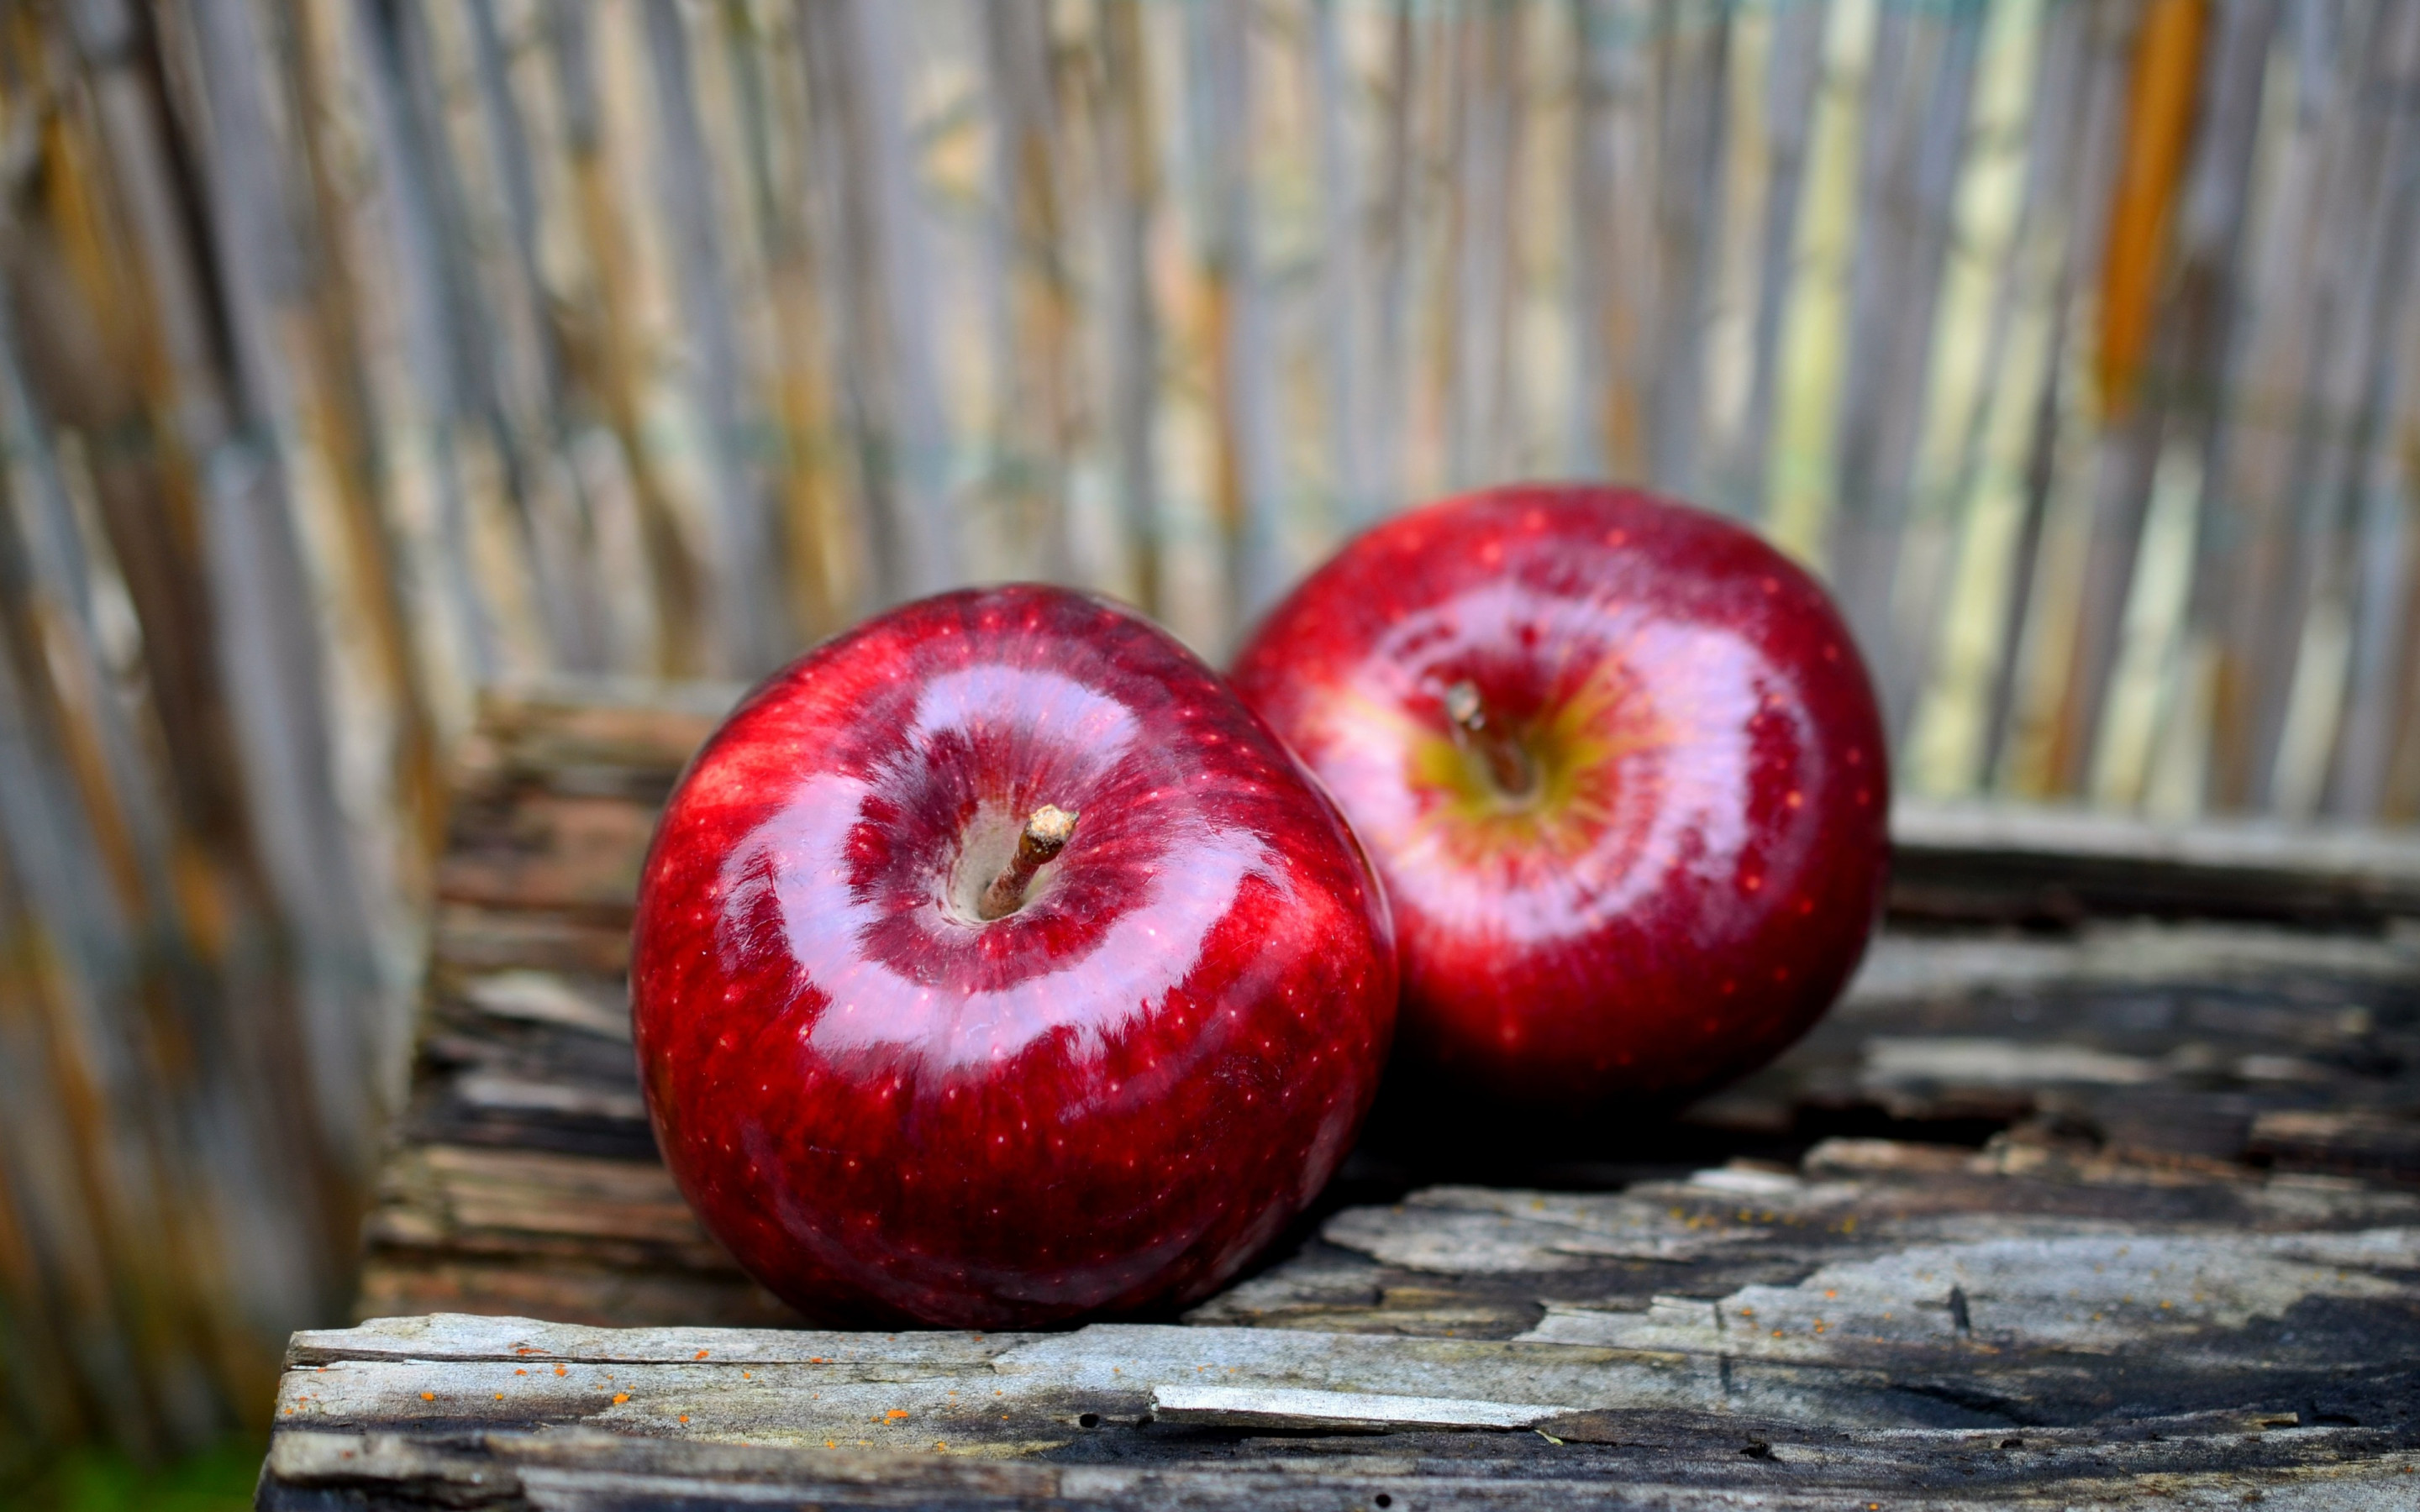 Delicious red apples wallpaper 2880x1800